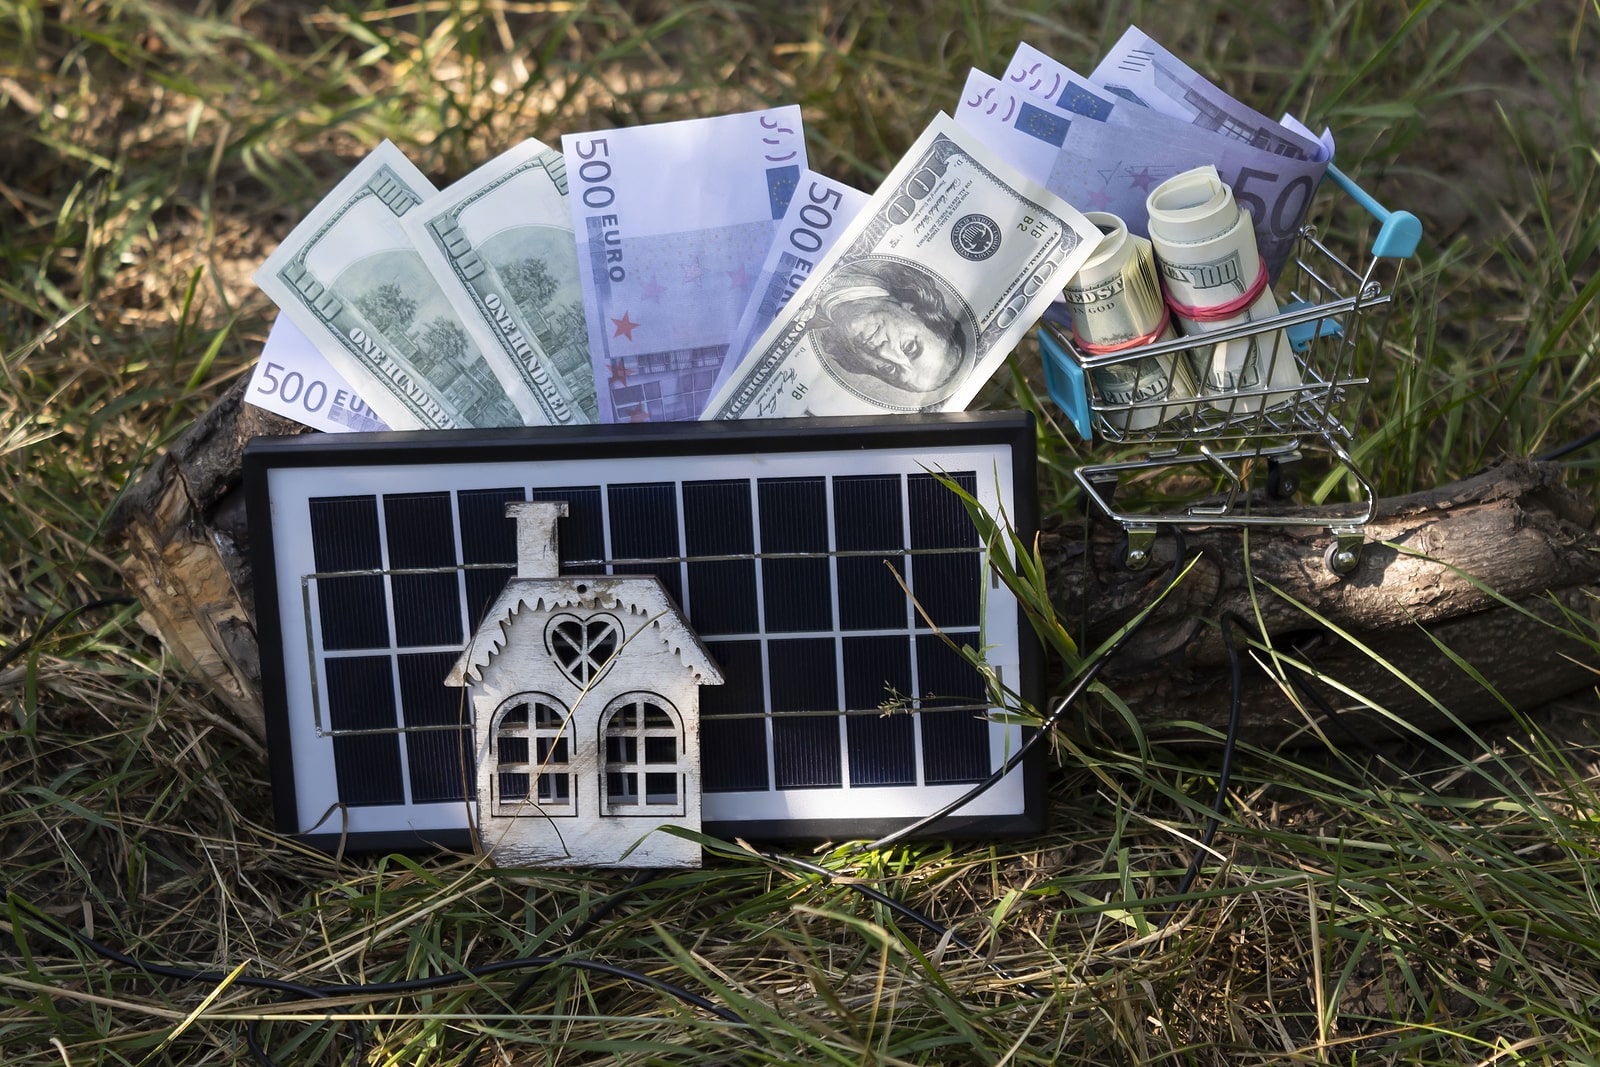 solar panel, a supermarket trolley with money, and a mock-up of a house, concept of the federal solar panel rebate